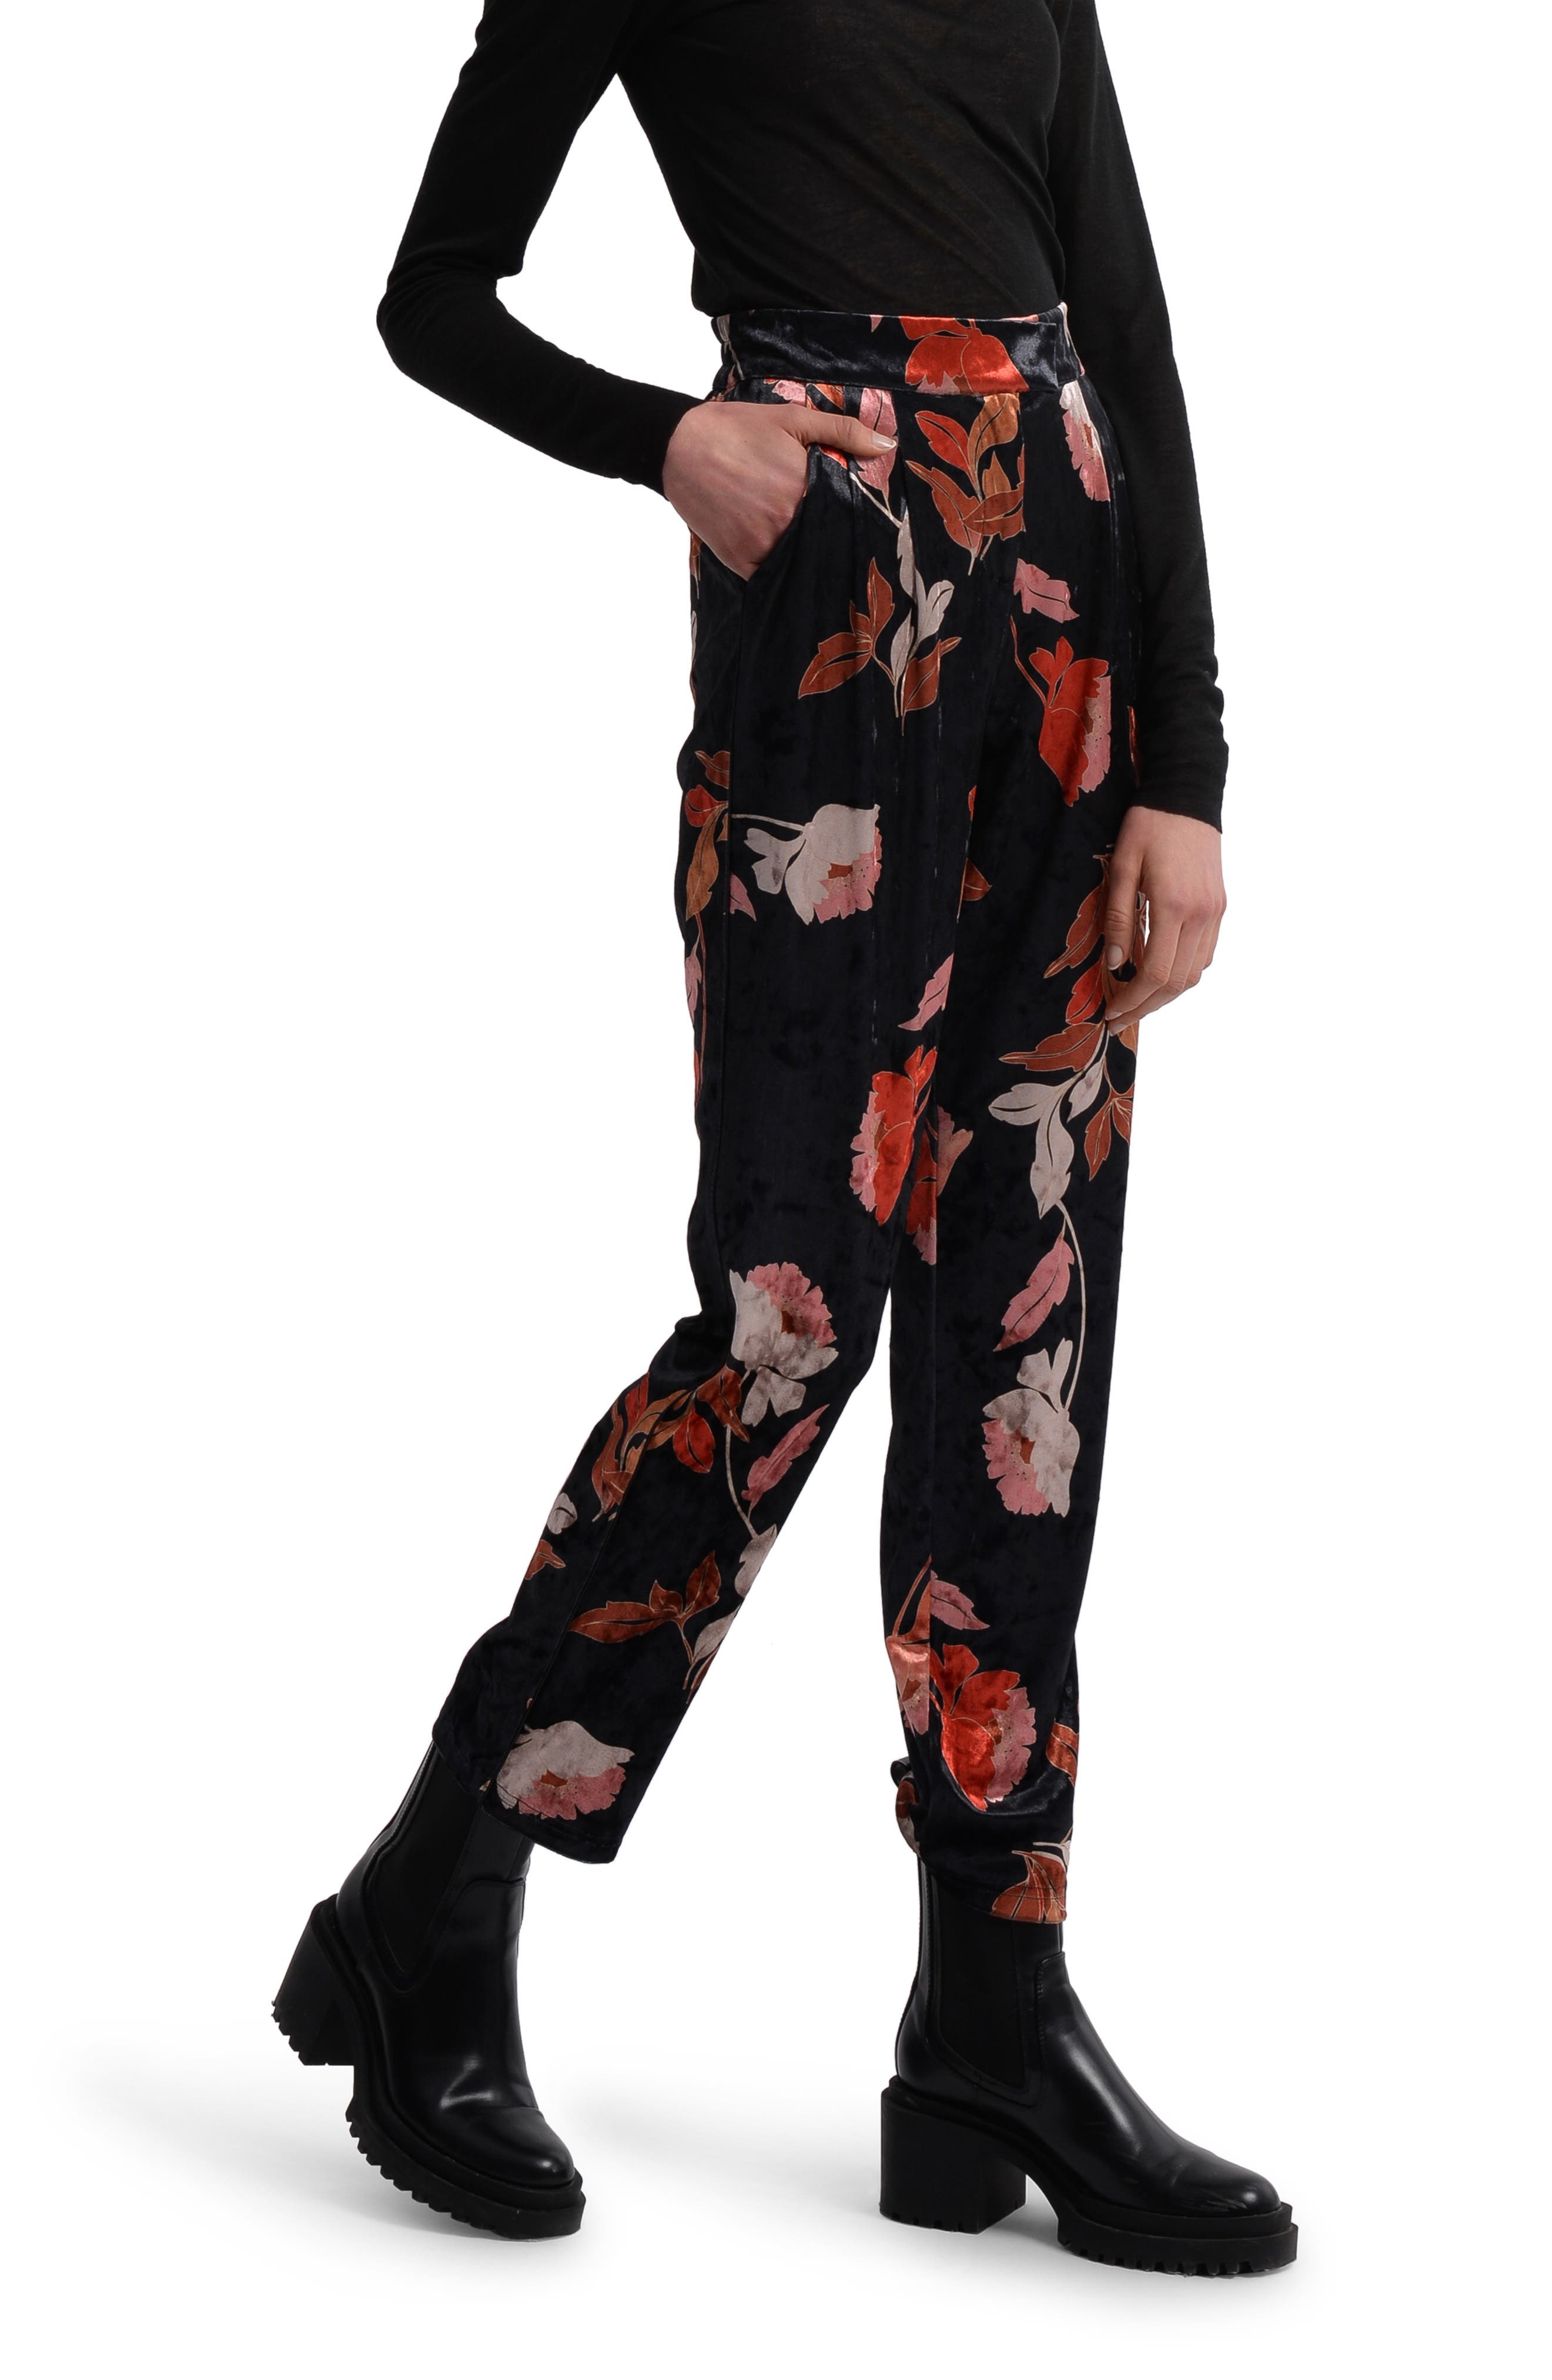 & Other Stories Floral Jacquard Trousers in Blue Slacks and Chinos Full-length trousers Womens Clothing Trousers 